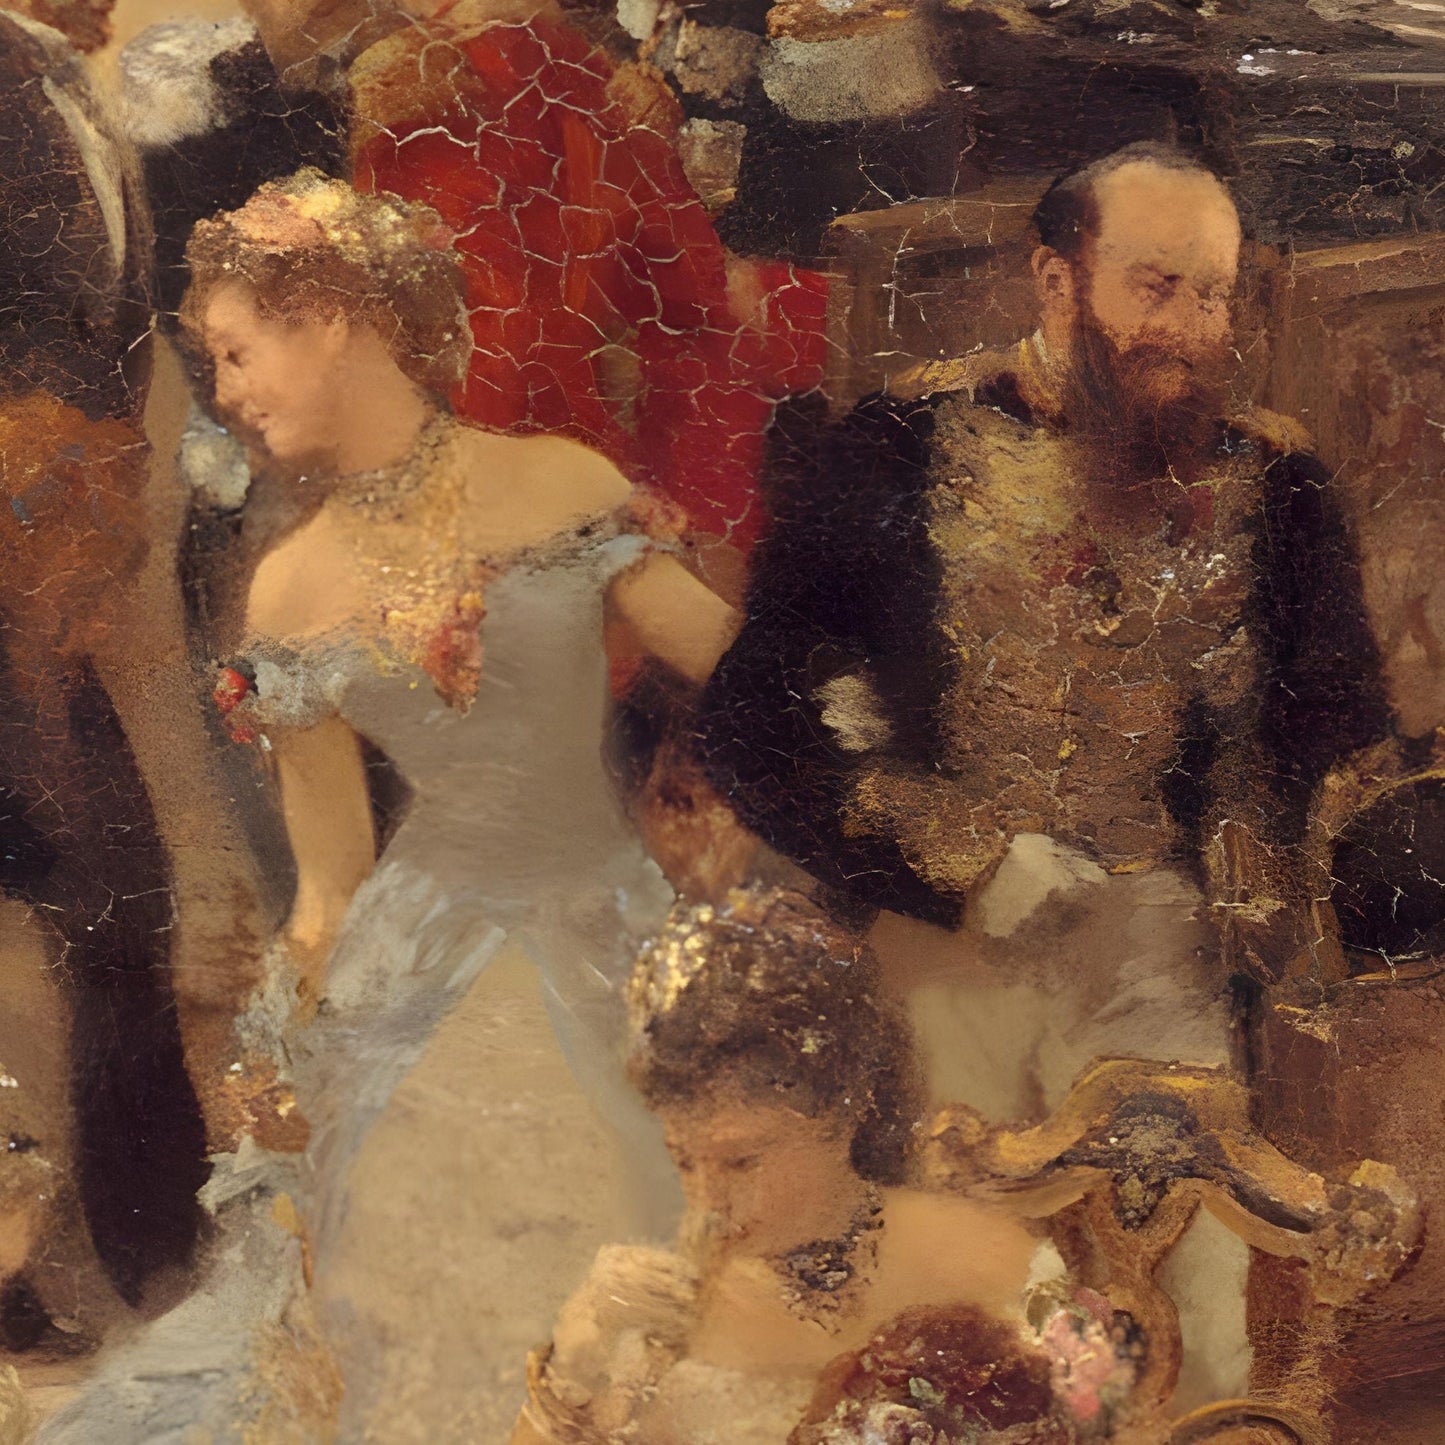 The Dinner at the Ball by Adolph Menzel, 3d Printed with texture and brush strokes looks like original oil-painting, code:143